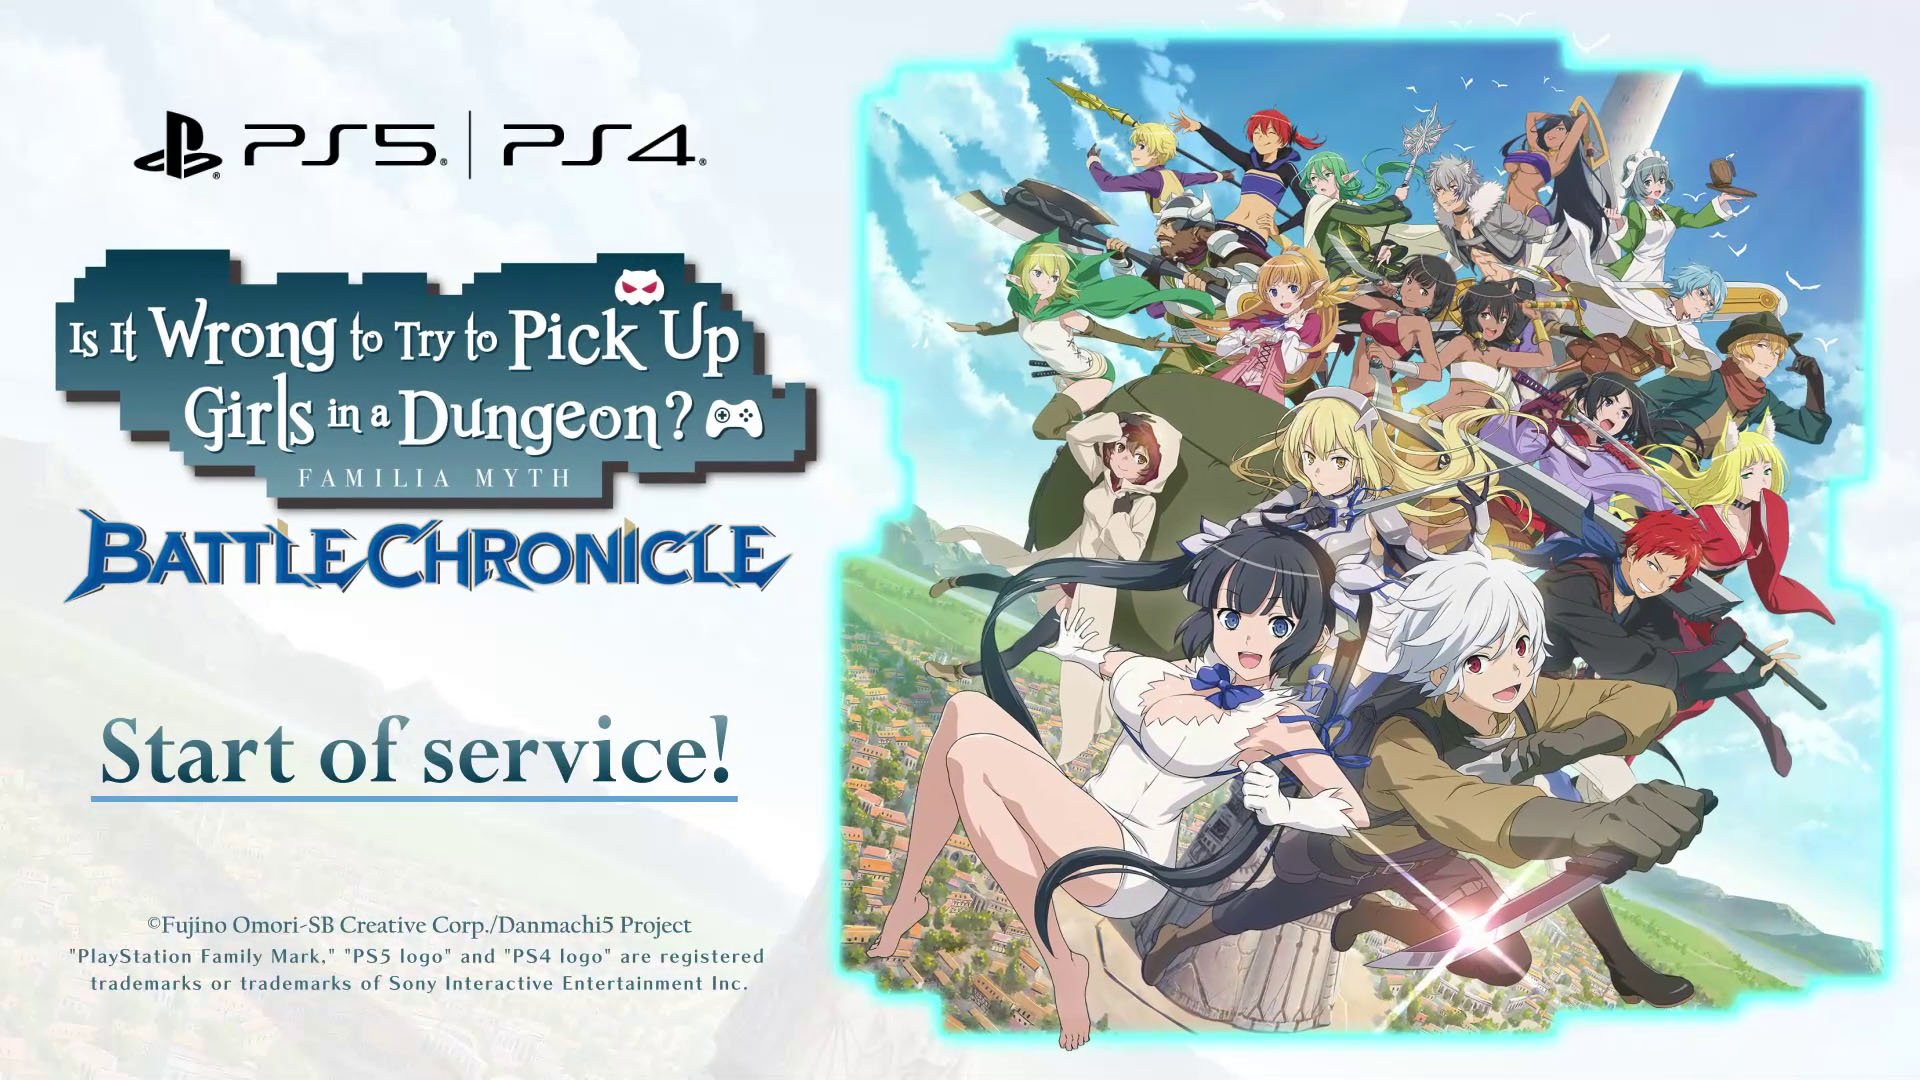 #
      Is It Wrong to Try to Pick Up Girls in a Dungeon? Familia Myth Battle Chronicle for PS5, PS4 now available